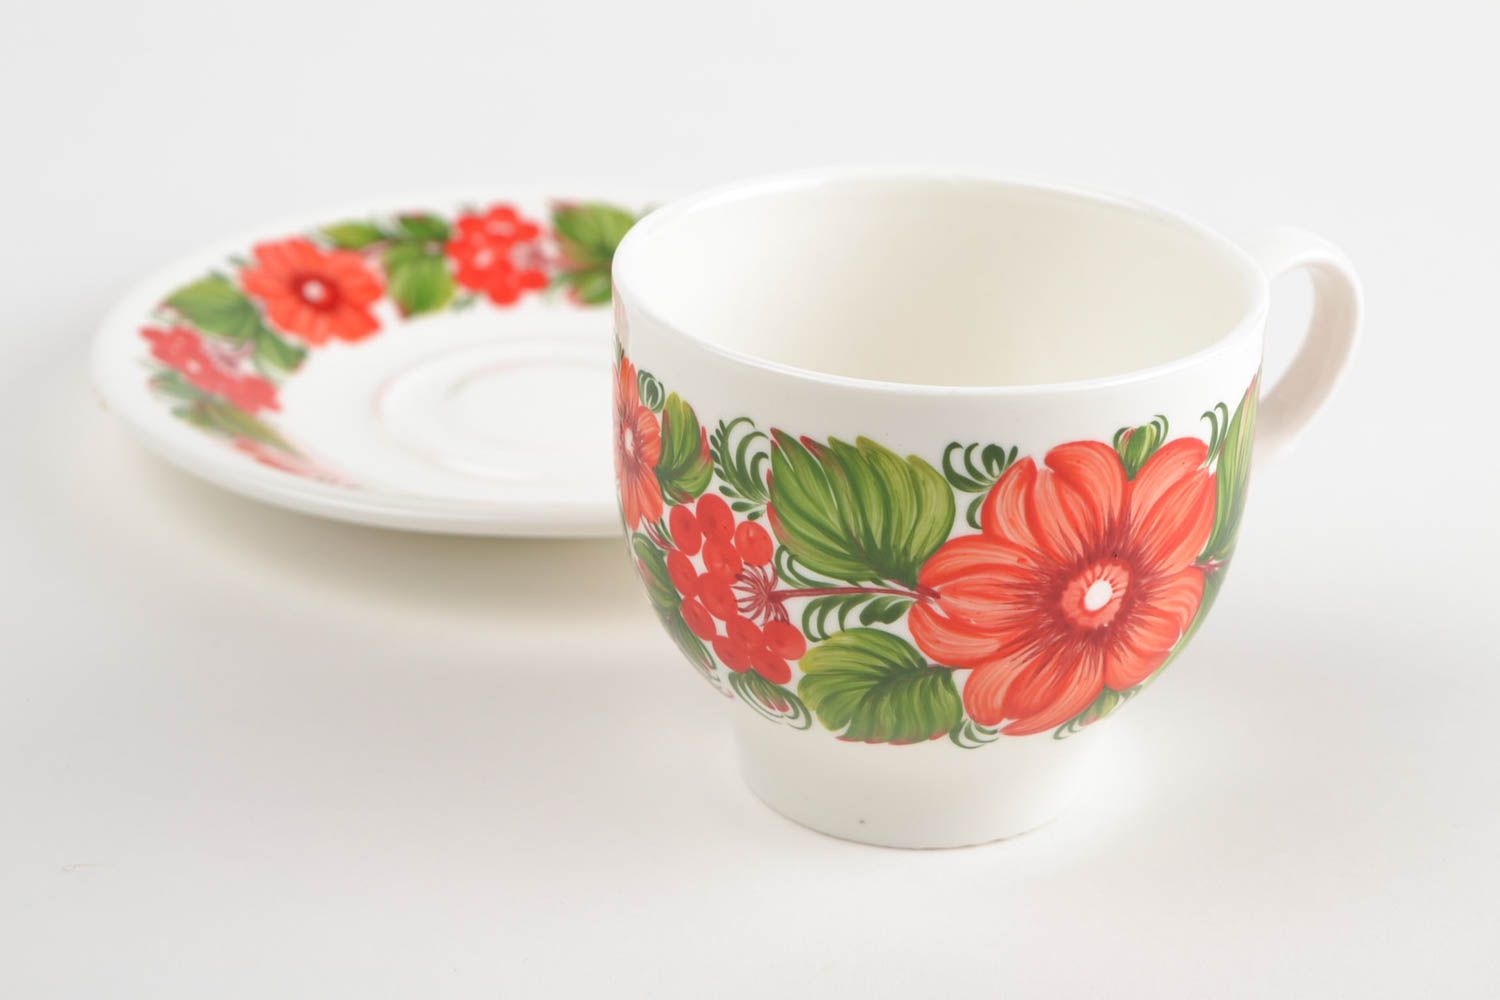 8 oz porcelain teacup with Russian style floral red and green pattern photo 3